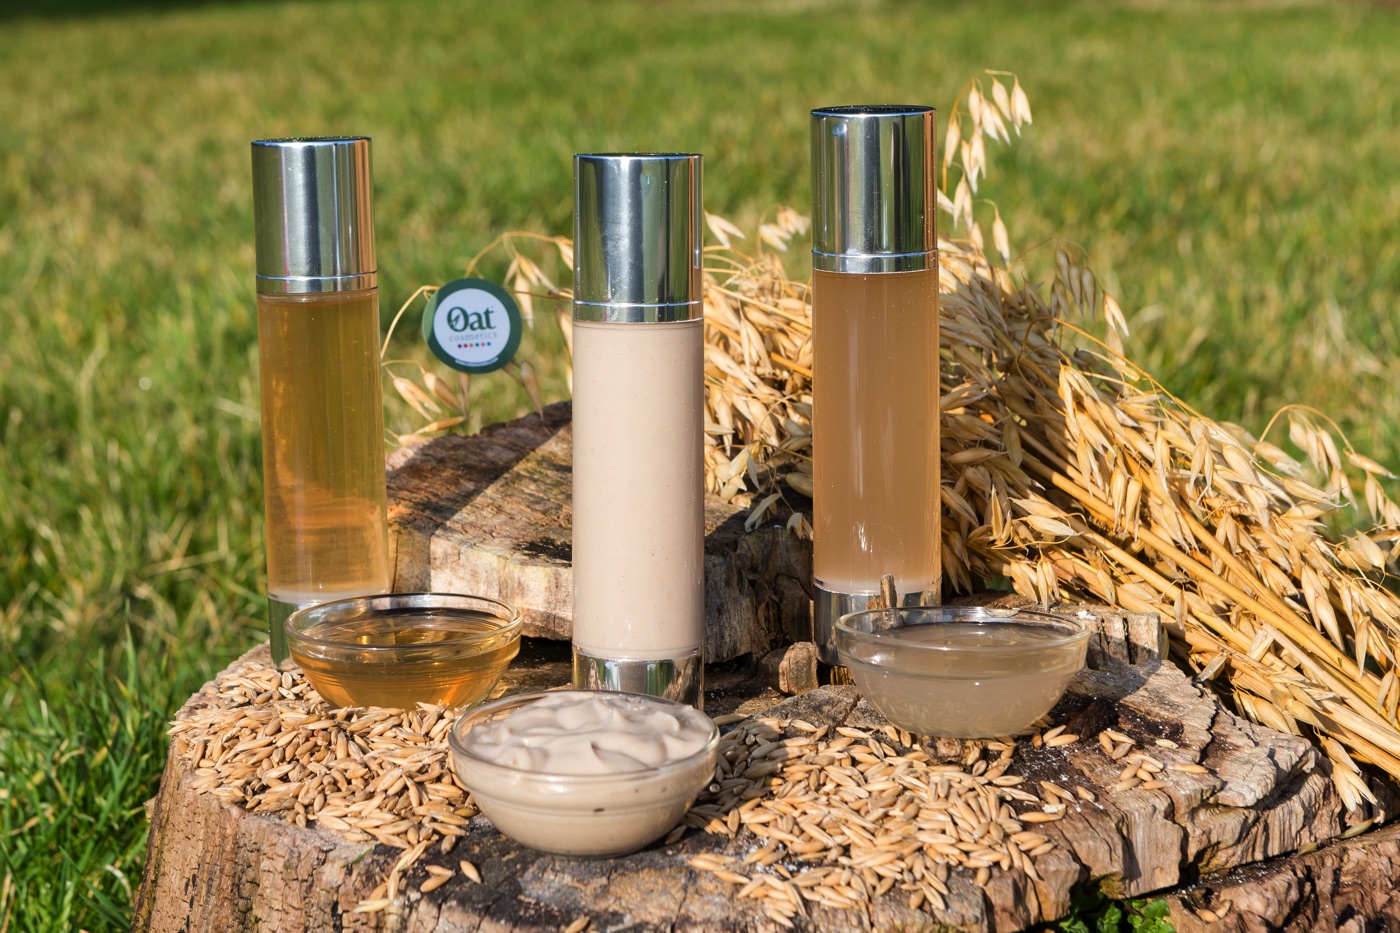 Product photo of the aurafirm range by Oat Cosmetics.